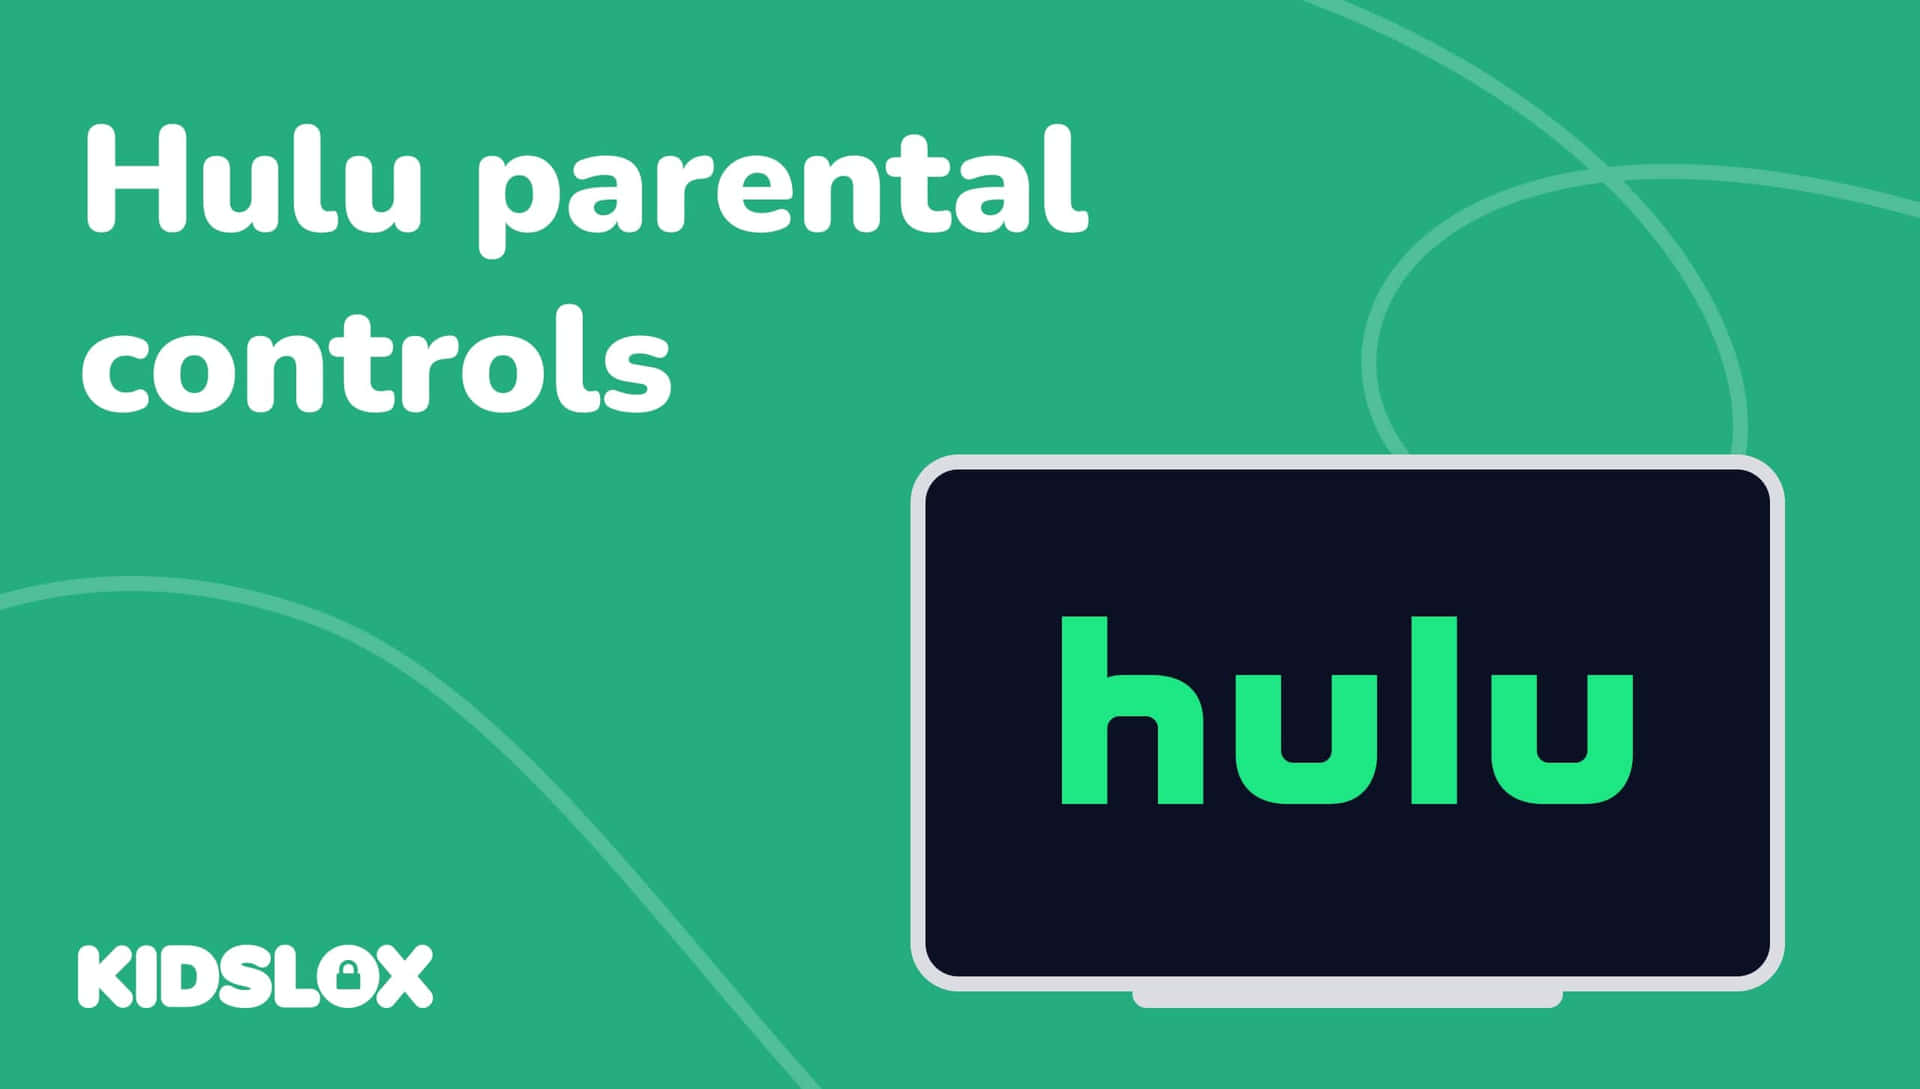 Stream your favorite movies and shows on Hulu.